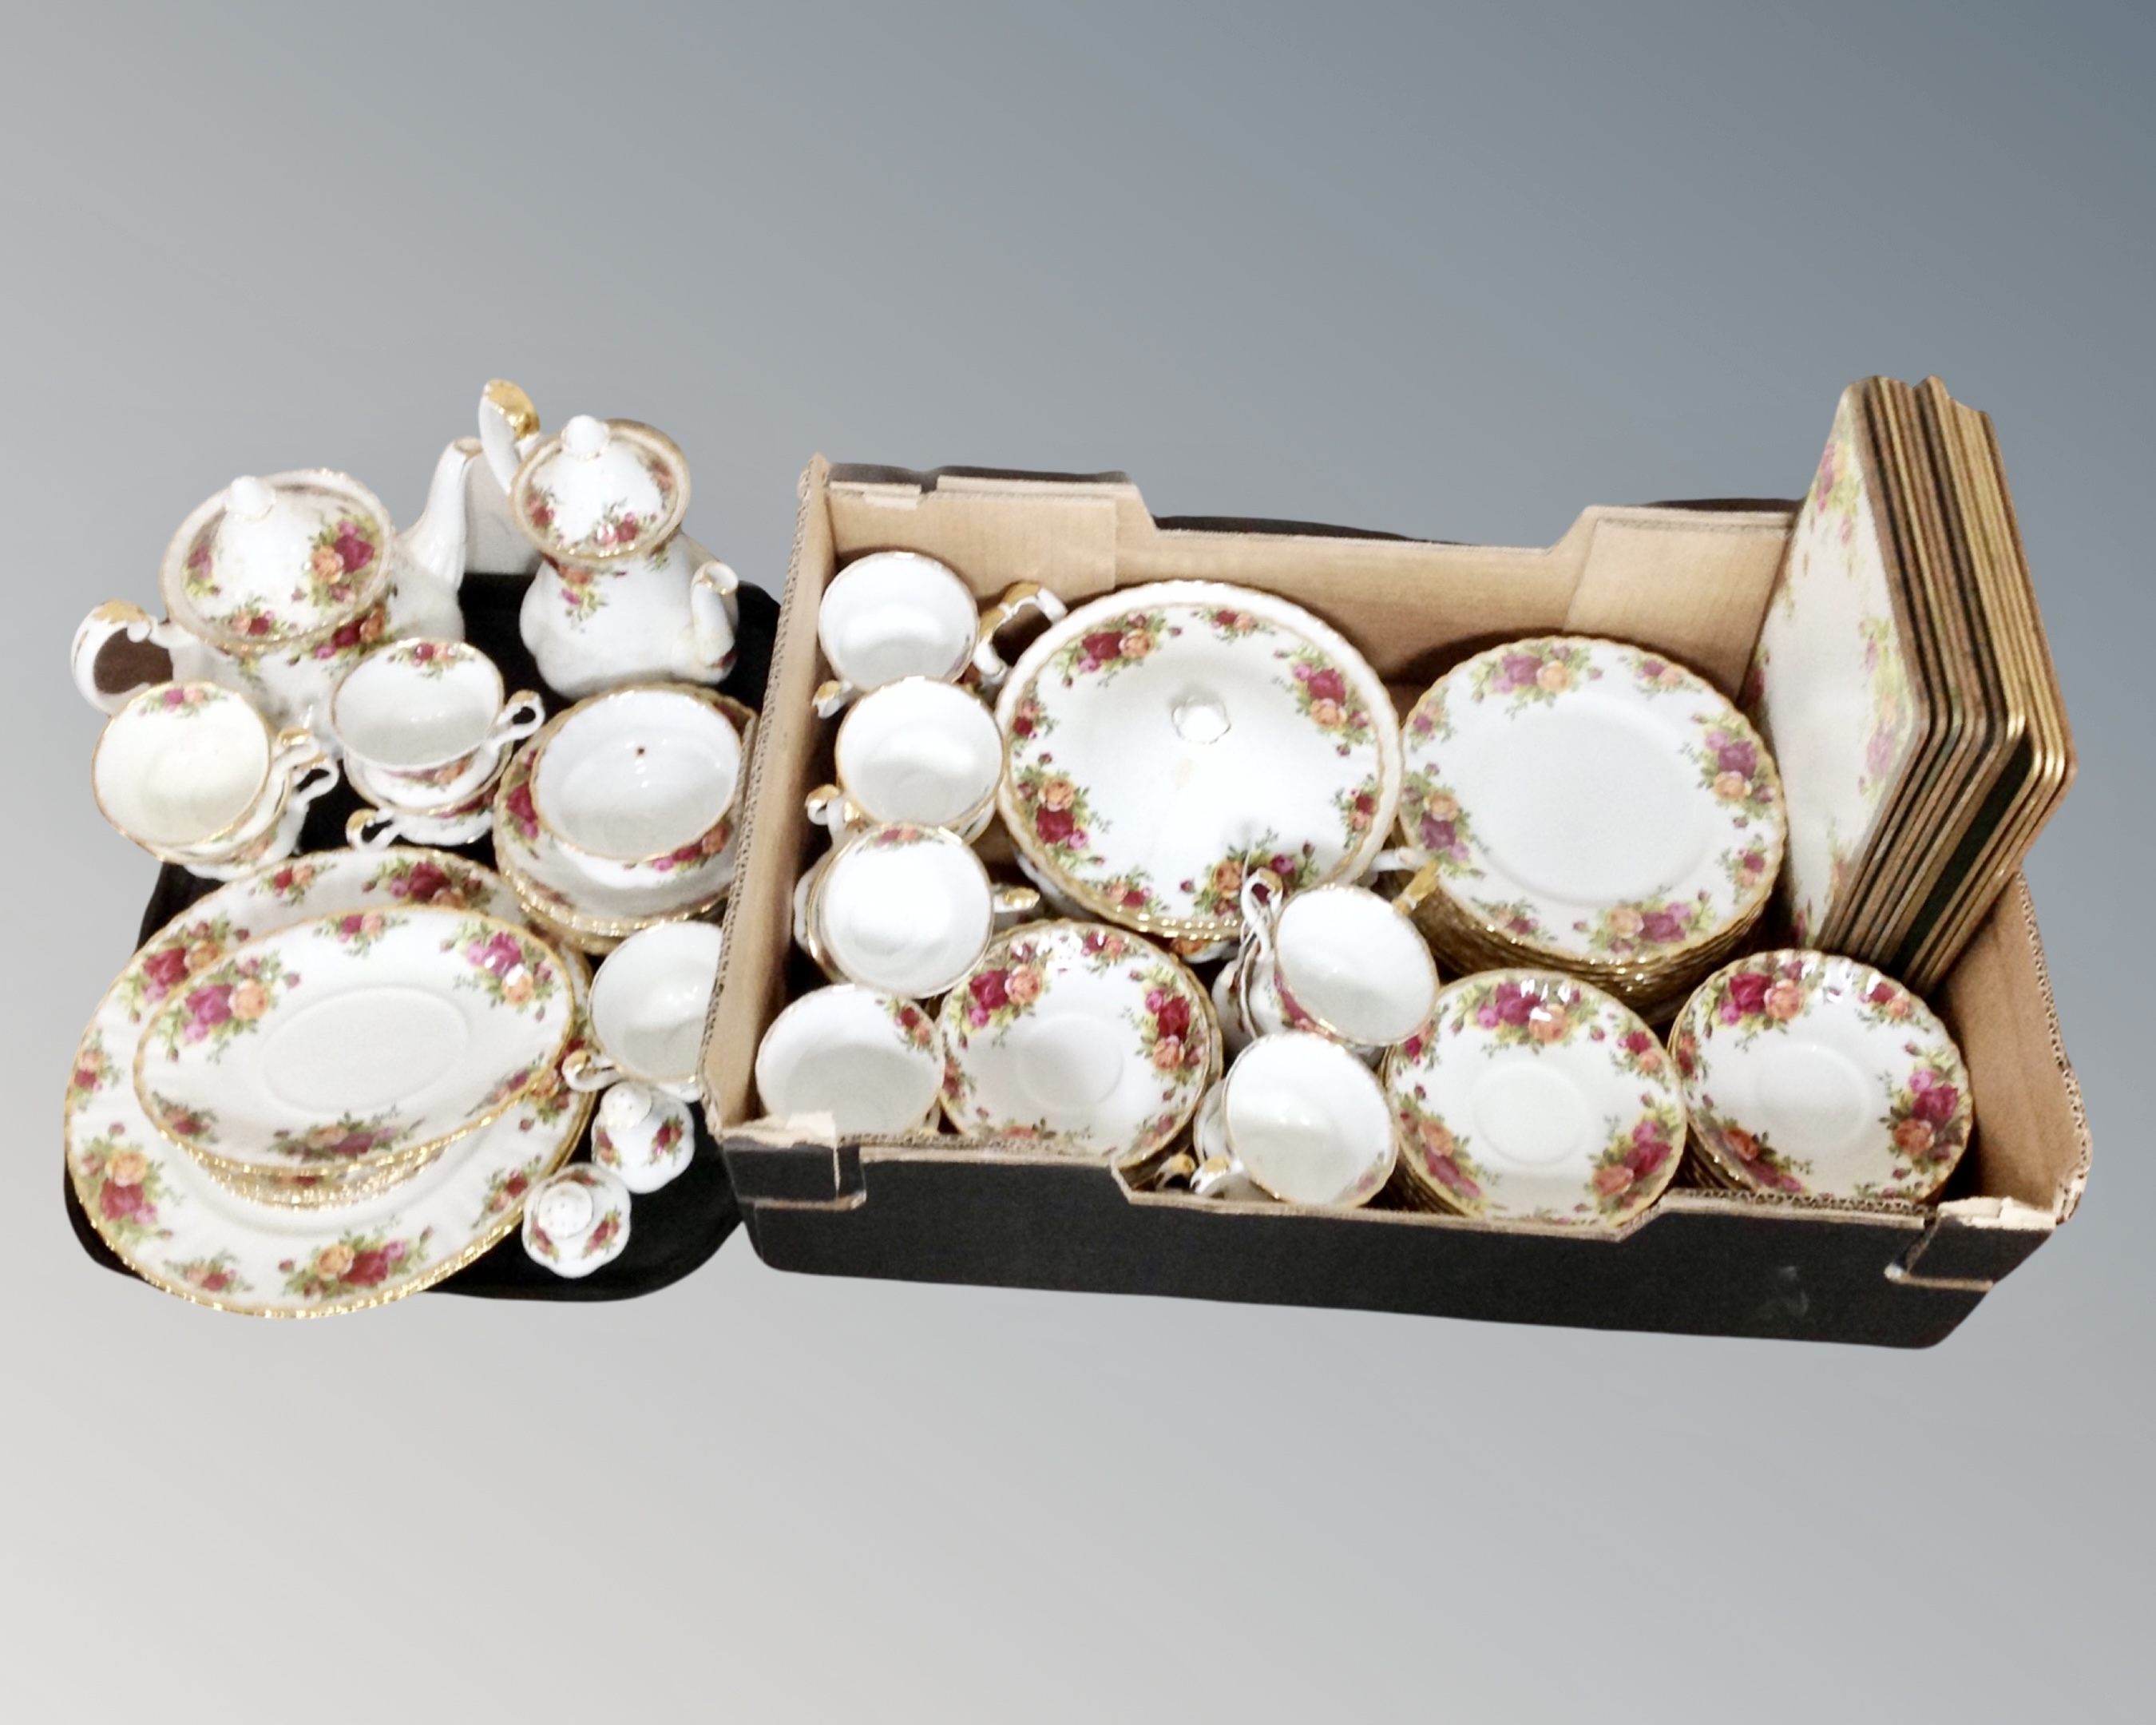 A box containing a quantity of Royal Albert Old Country Roses tea and dinner china together with